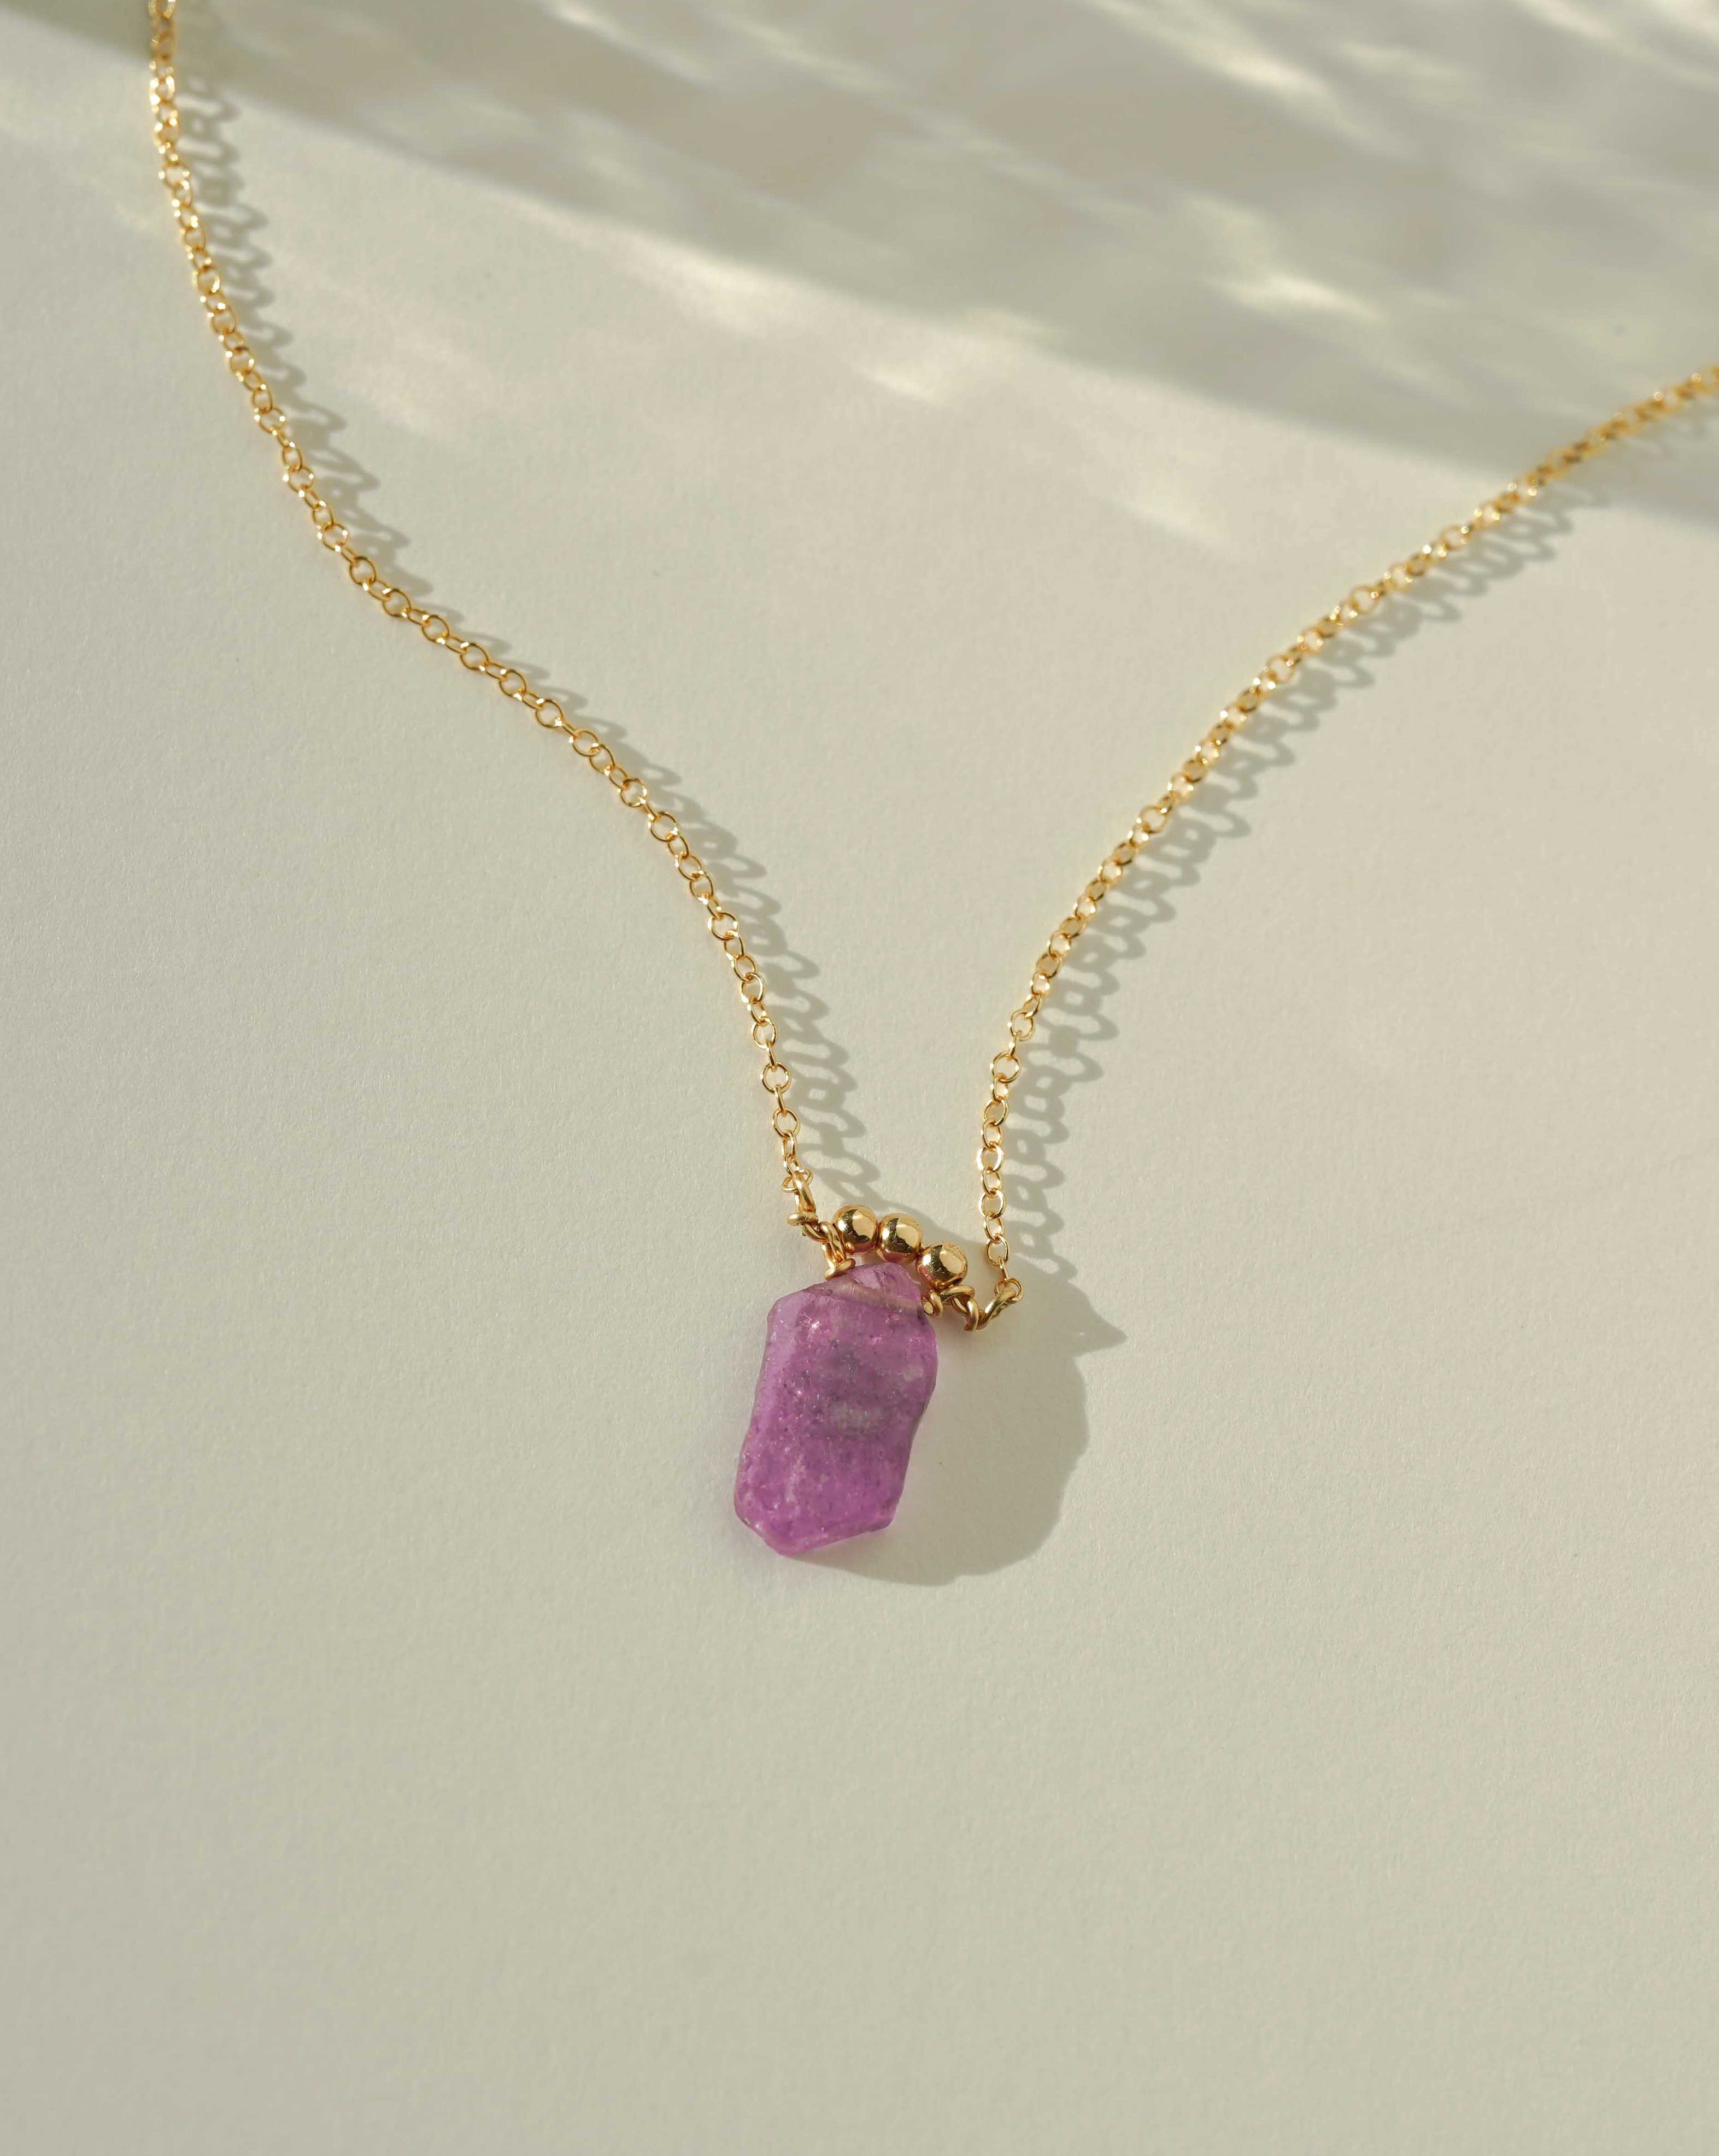 Zenda Necklace by KOZAKH. A 16 to 18 inch adjustable length necklace, crafted in 14K Gold Filled, featuring a Pink Tourmaline Slice and gold beaded accent.